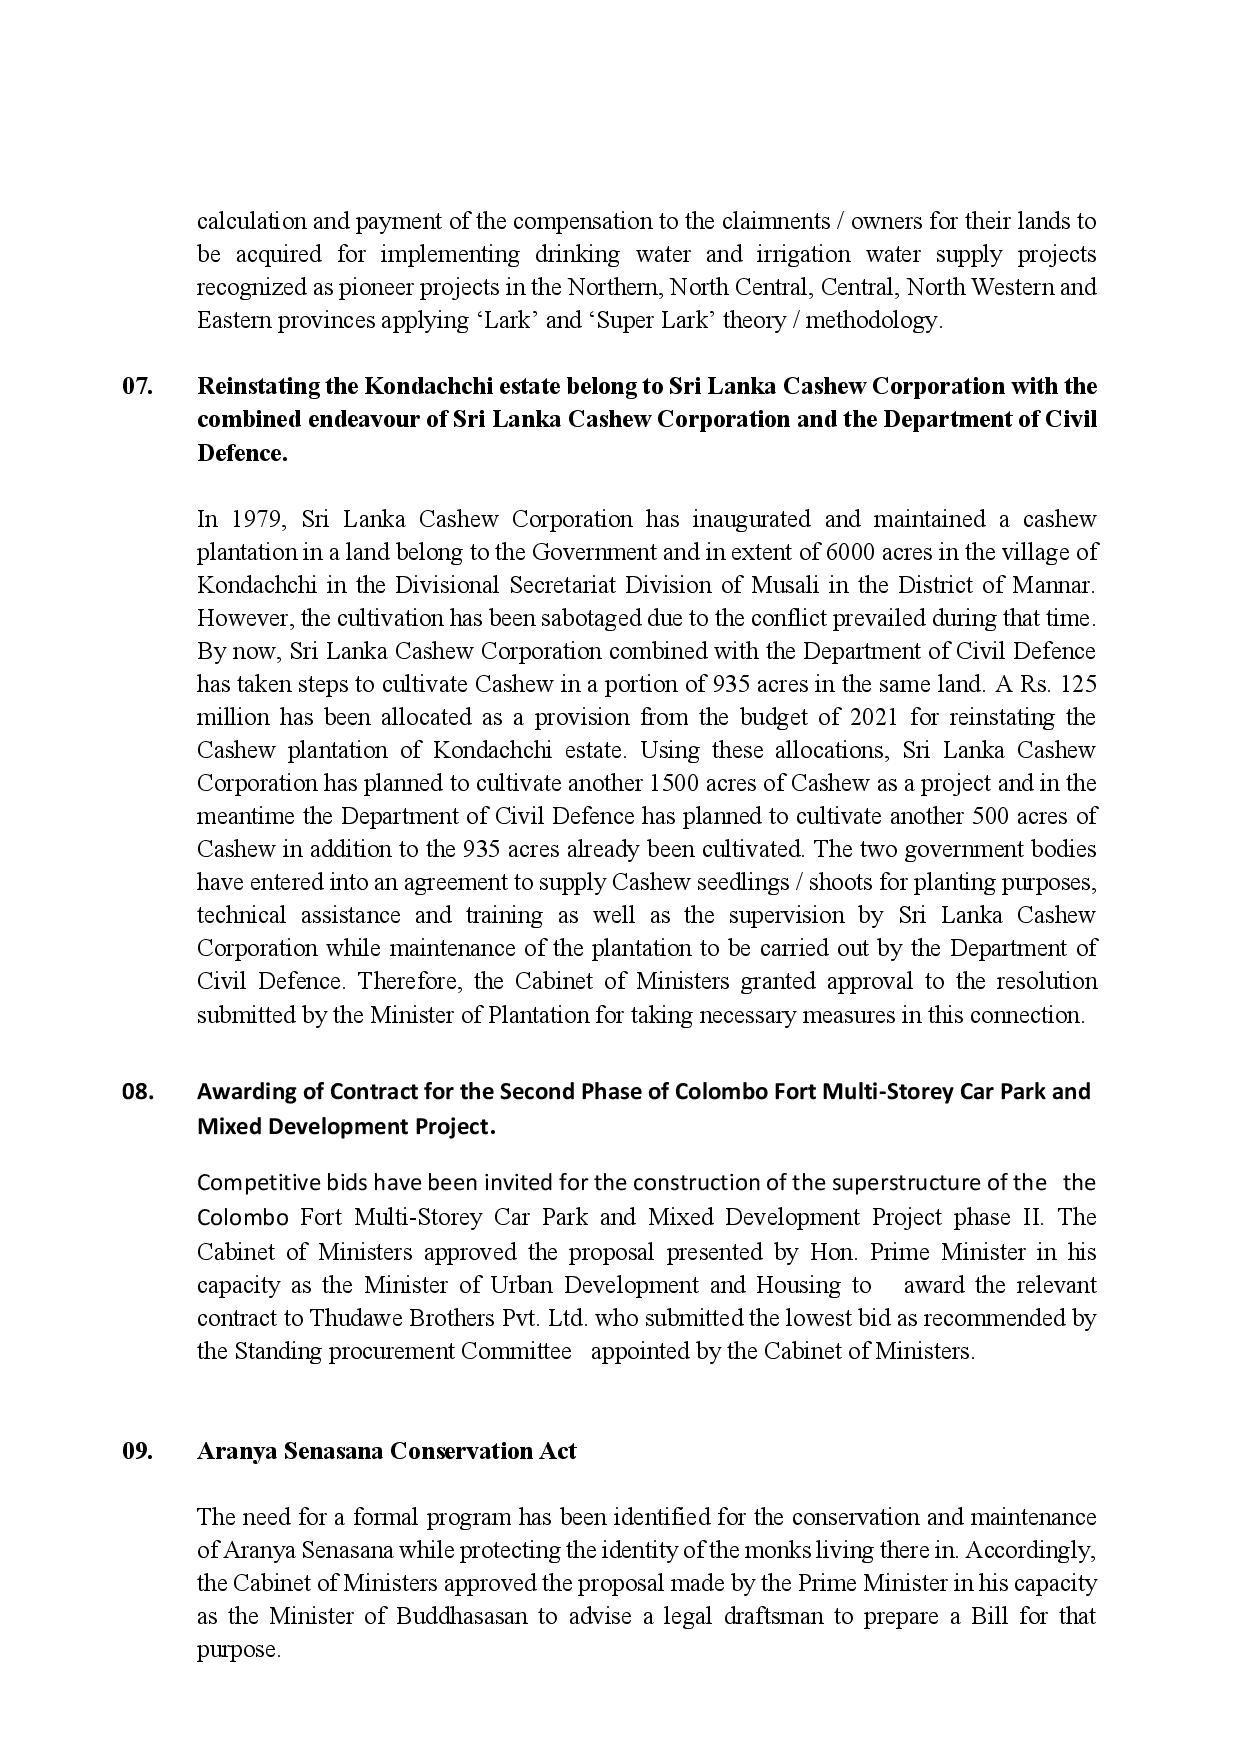 Cabinet Decisions on 05.07.2021 English page 003